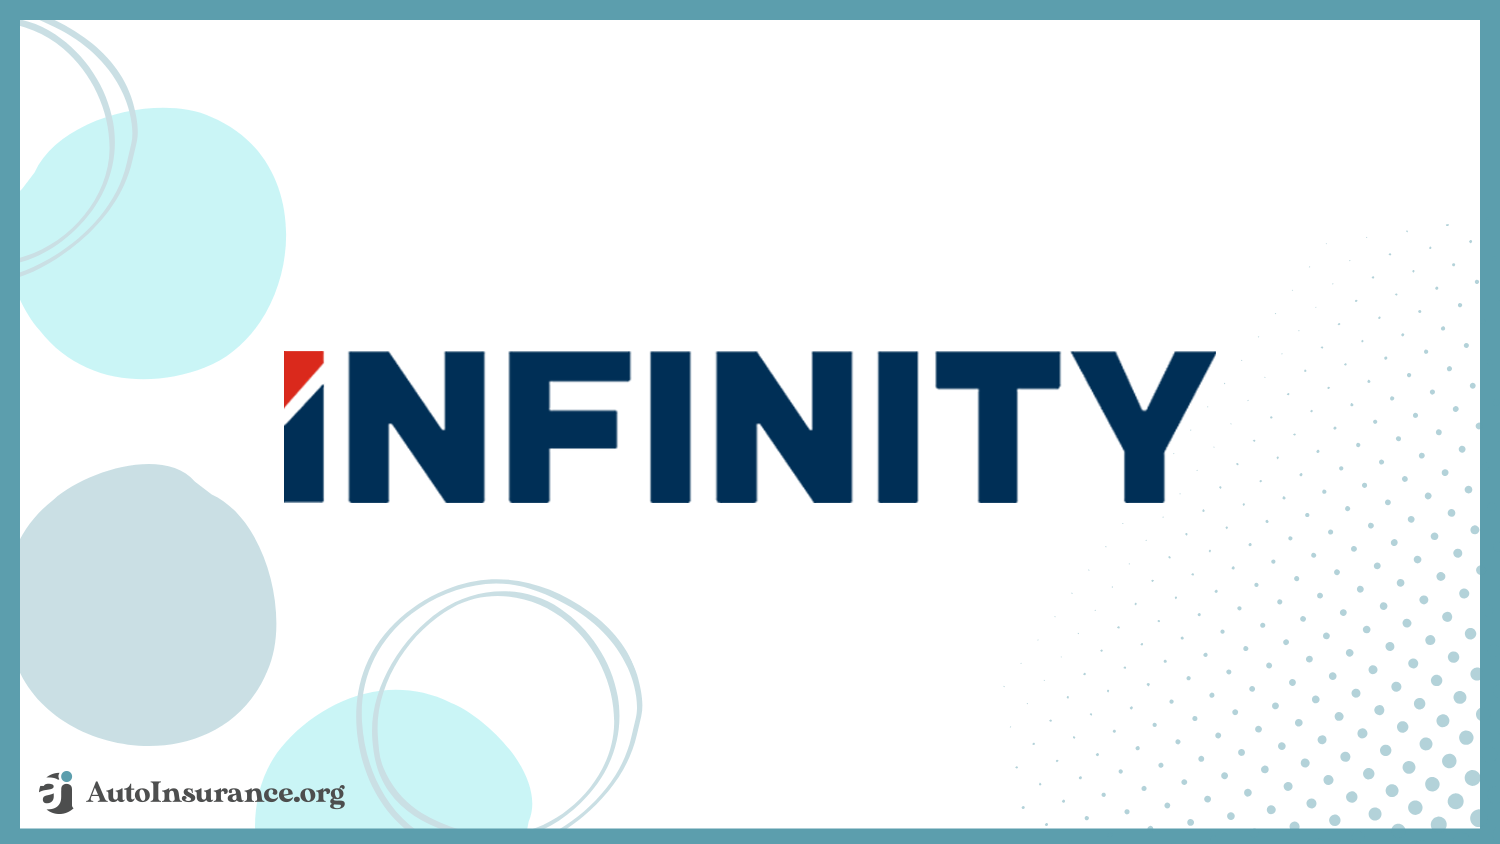 Infinity: Cheap Auto Insurance for Occasional Drivers